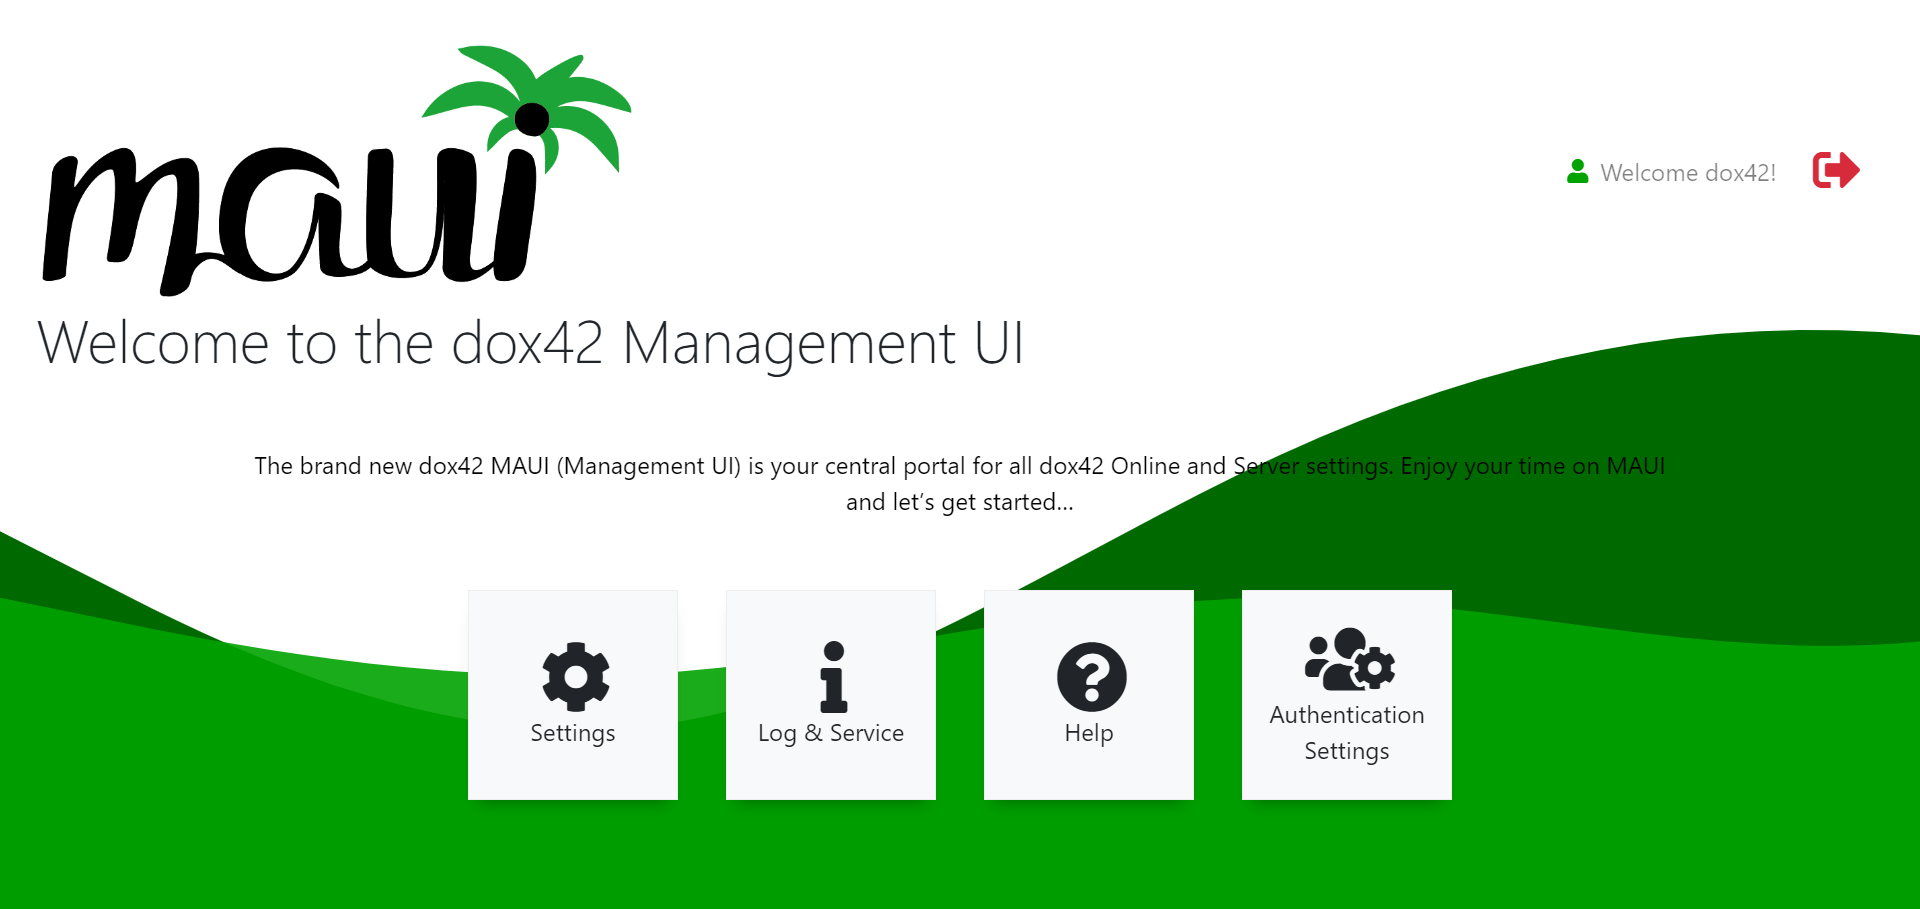 The dox42 Management UI is the central portal for all your dox42 Online settings